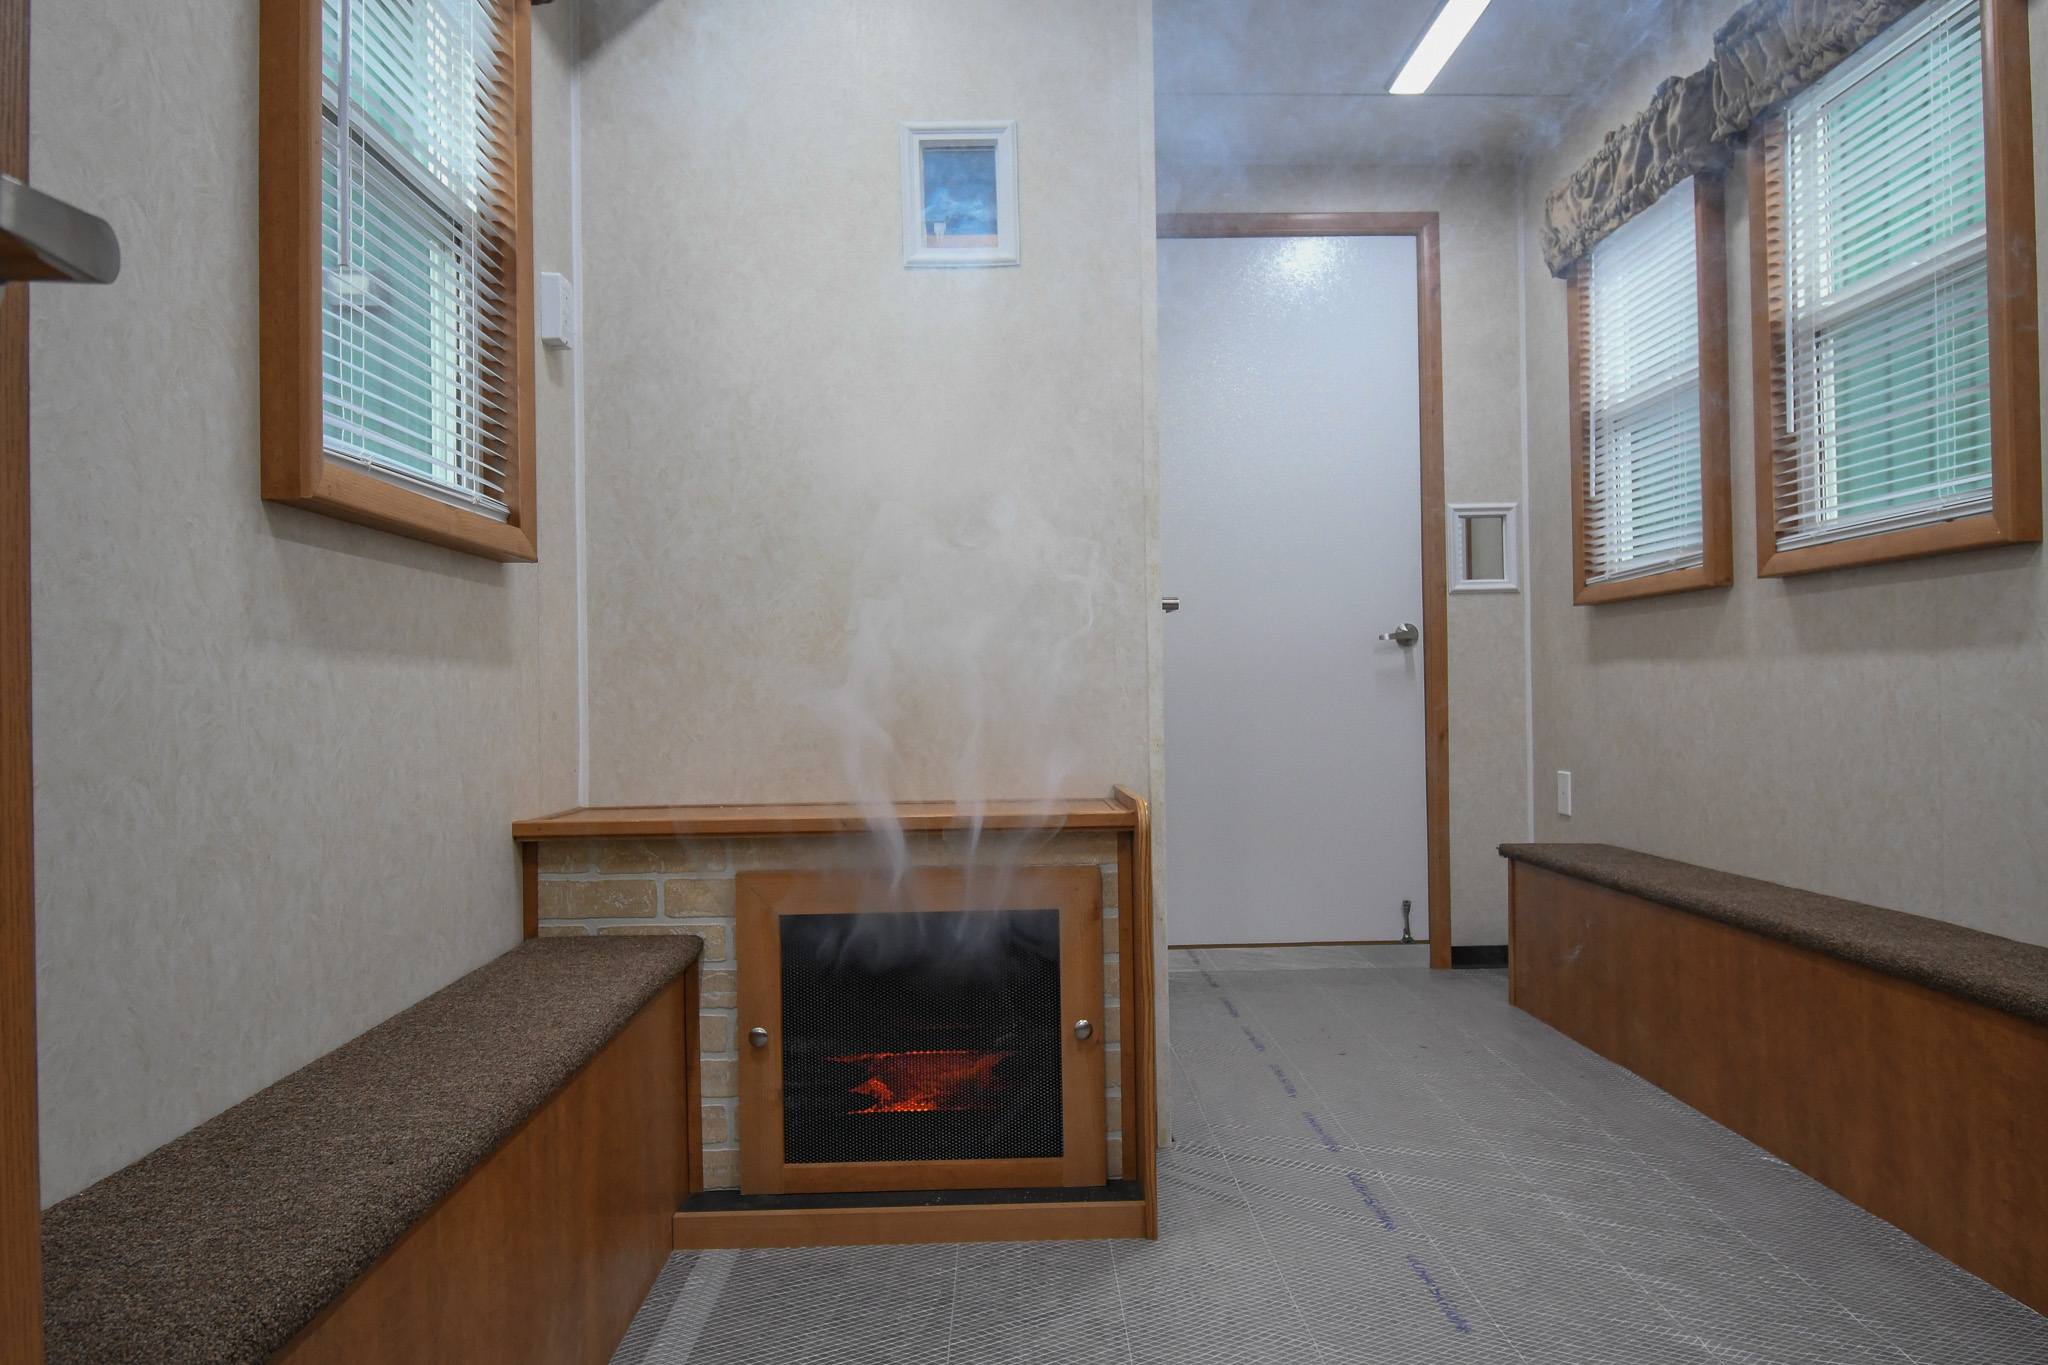 The smoking fireplace inside the units for Sandy, UT.